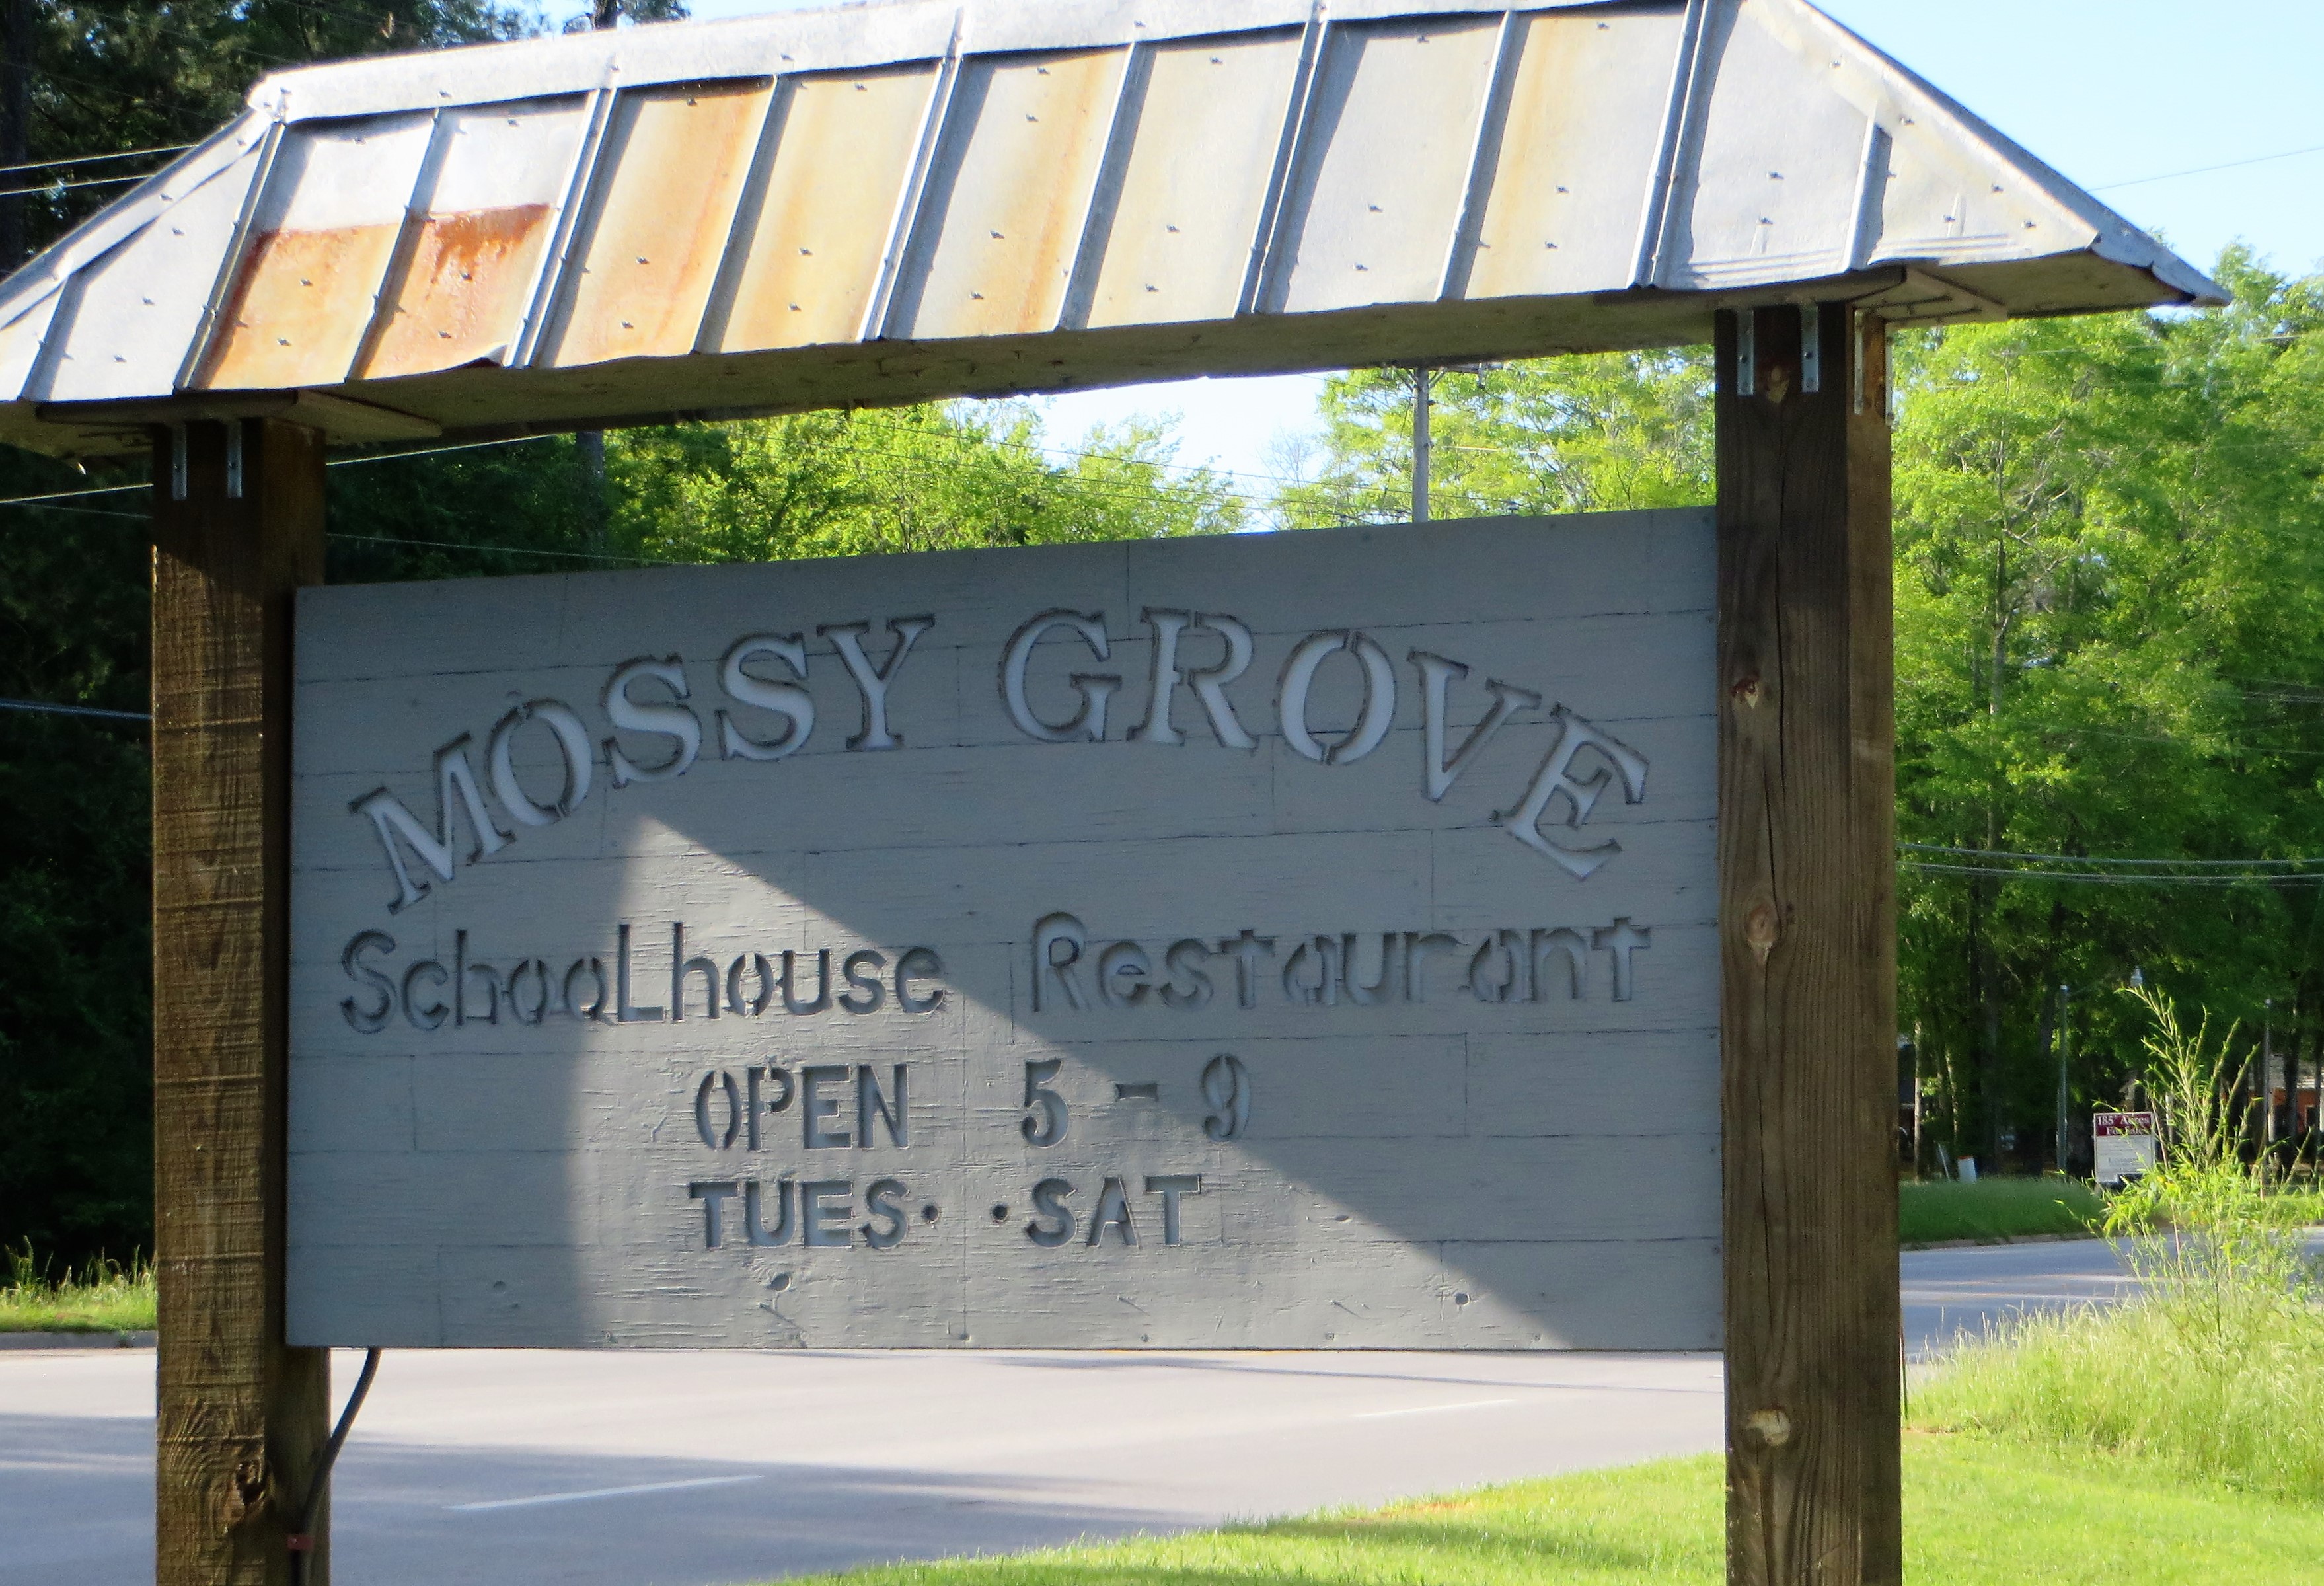 Mossy Grove Sign